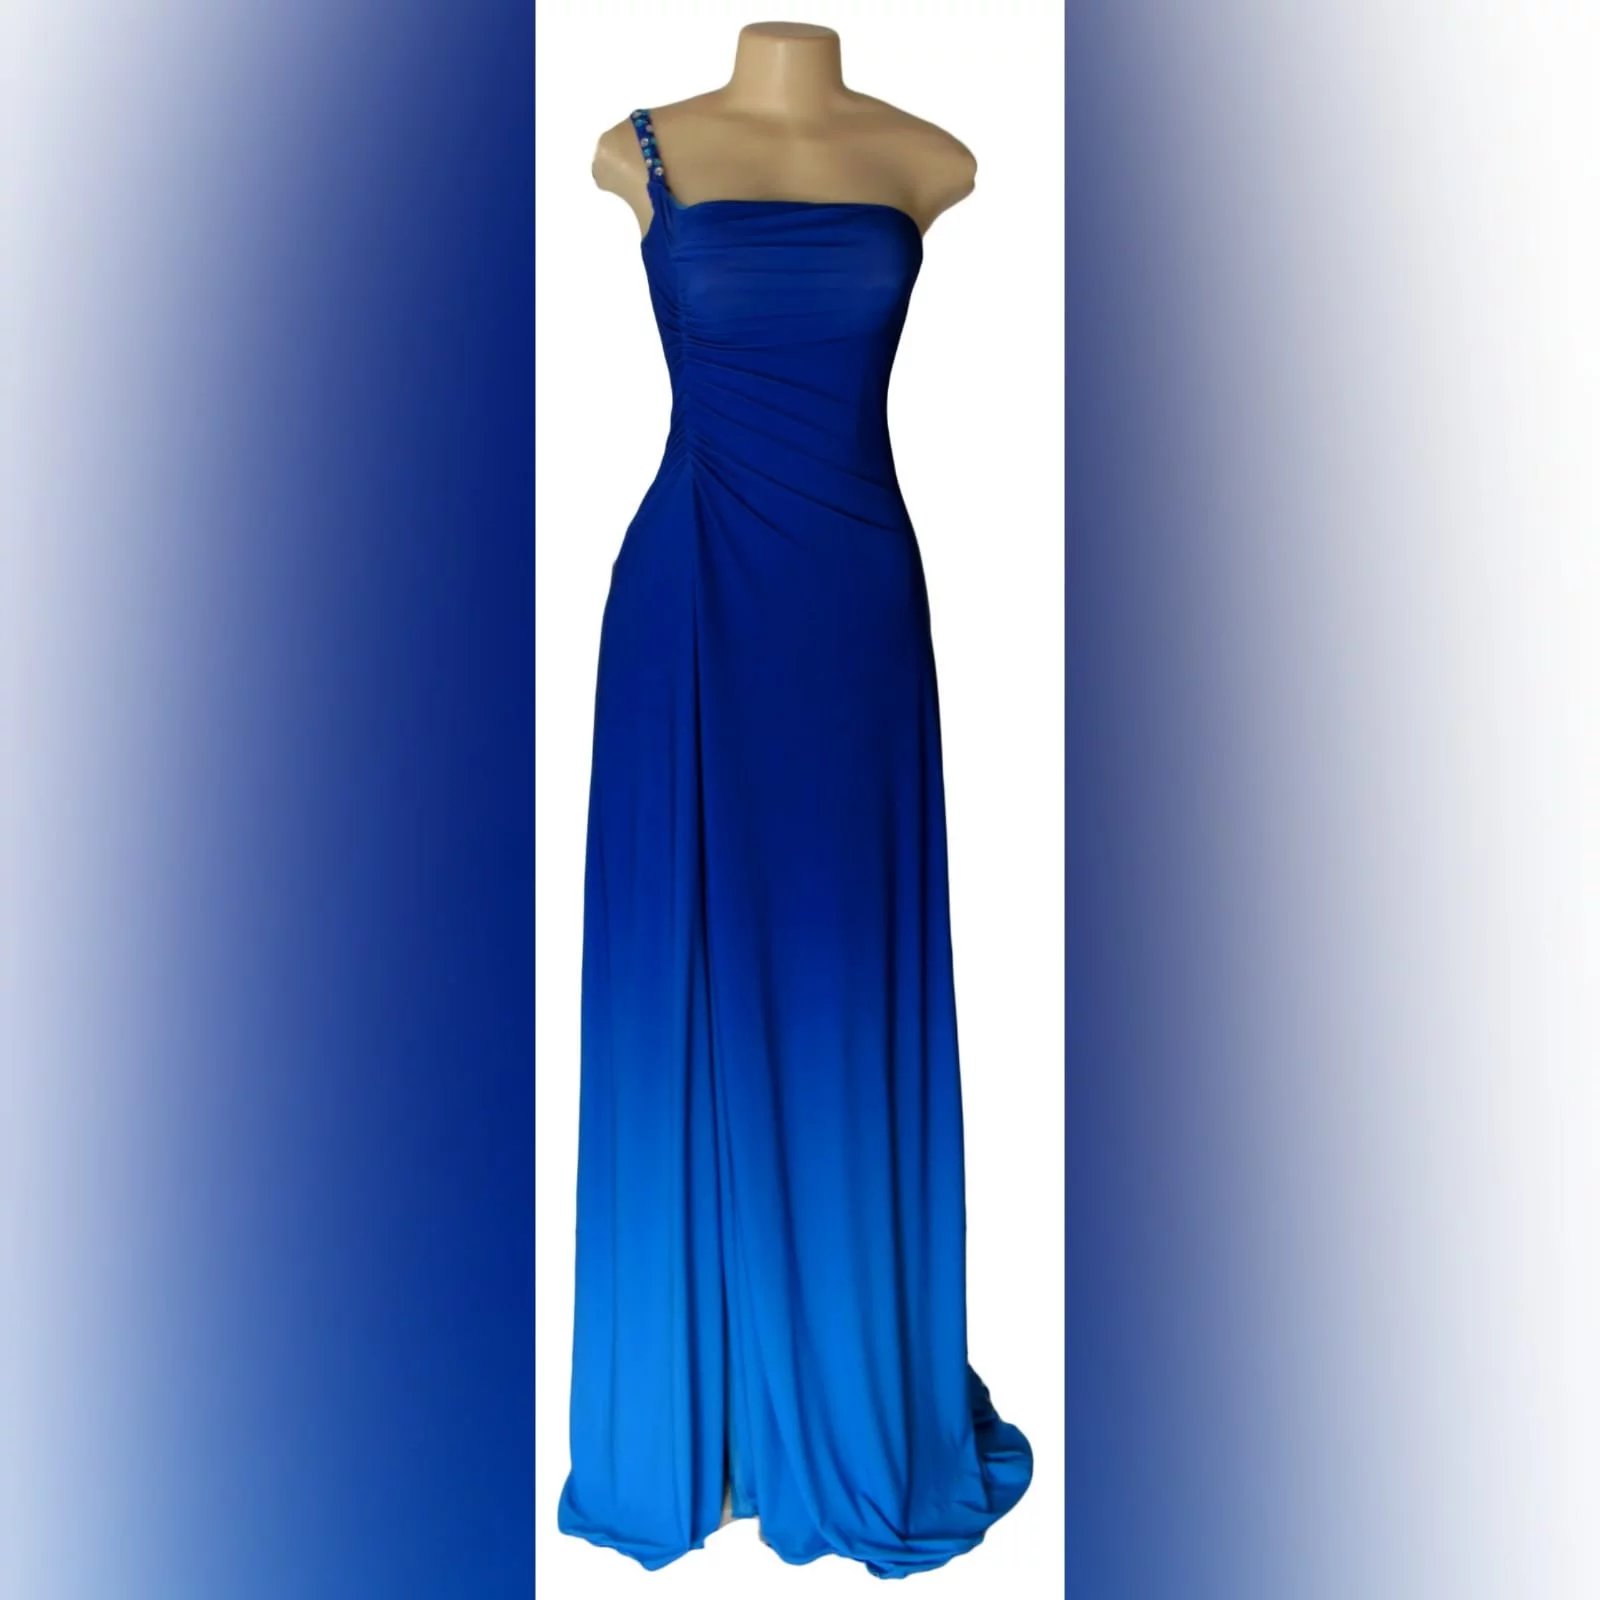 Blue ombre maid of honour dress 3 blue ombre maid of honour dress with a single beaded/bling shoulder design.